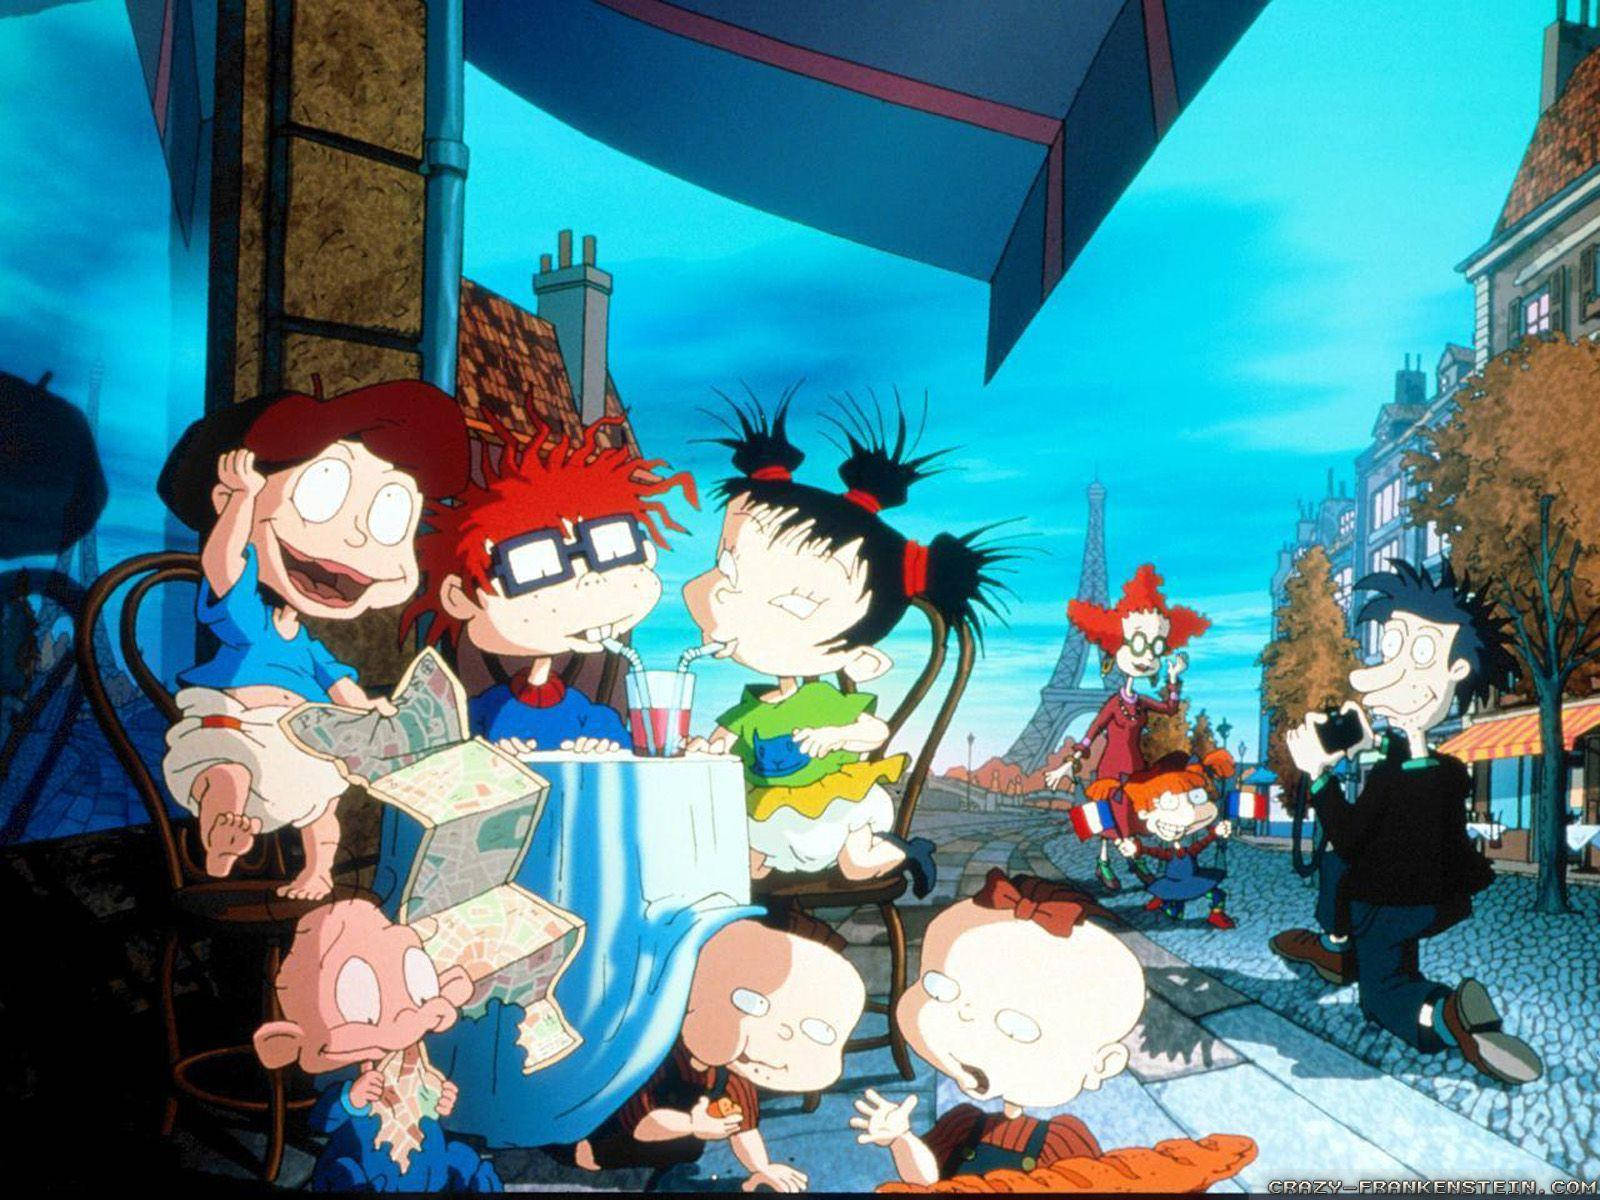 Life’s An Adventure For The Rugrats! Background